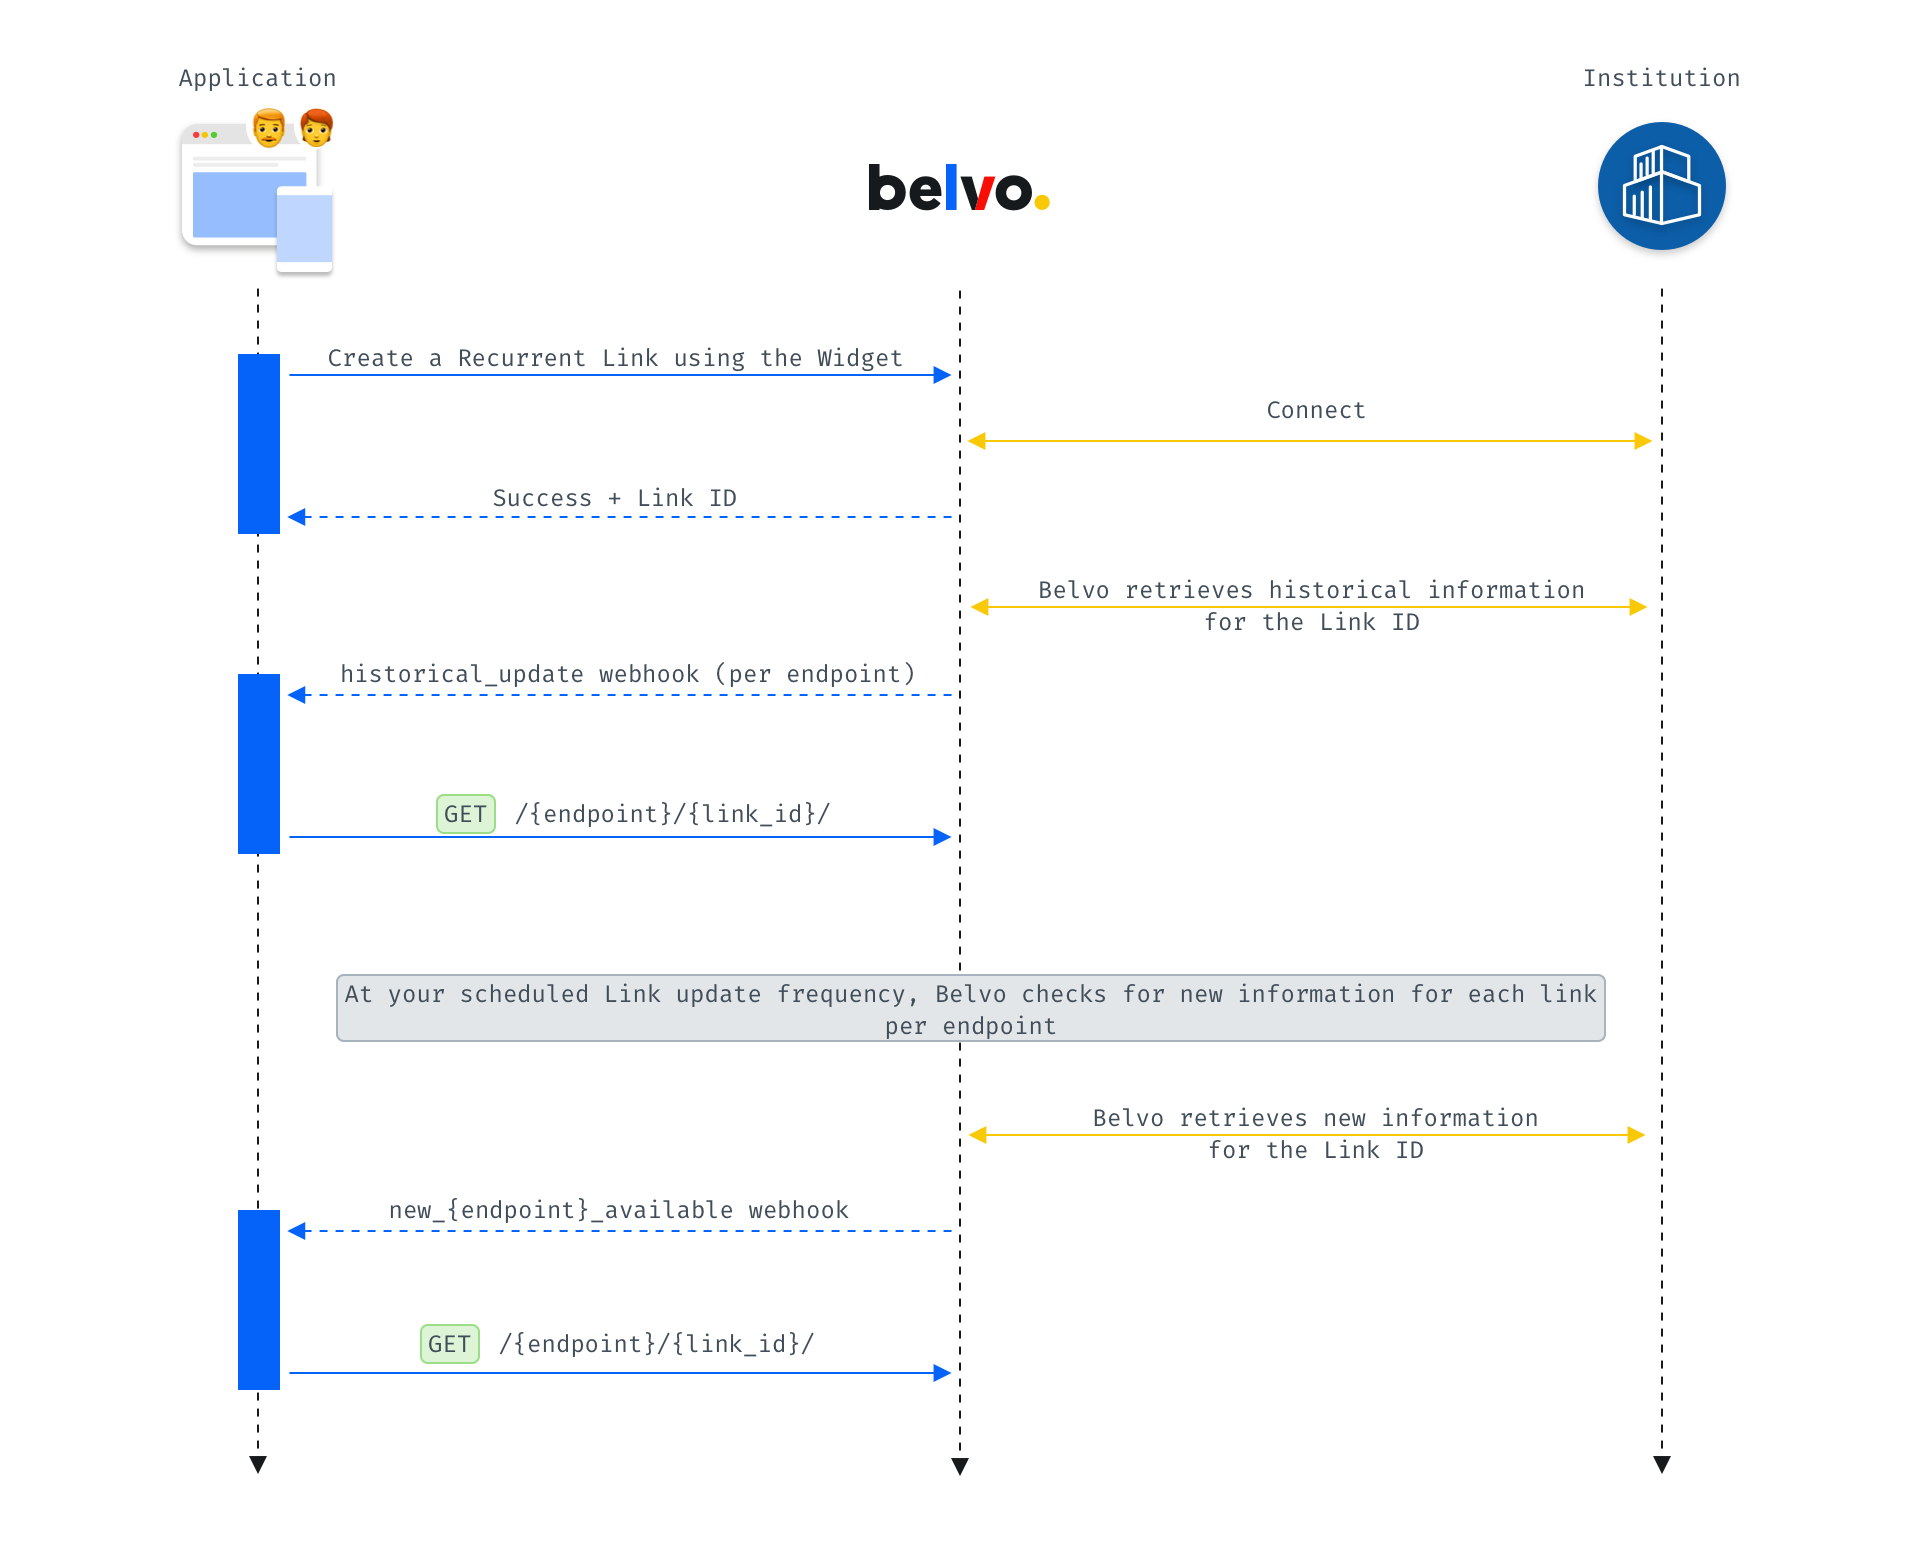 A sample banking flow with Belvo